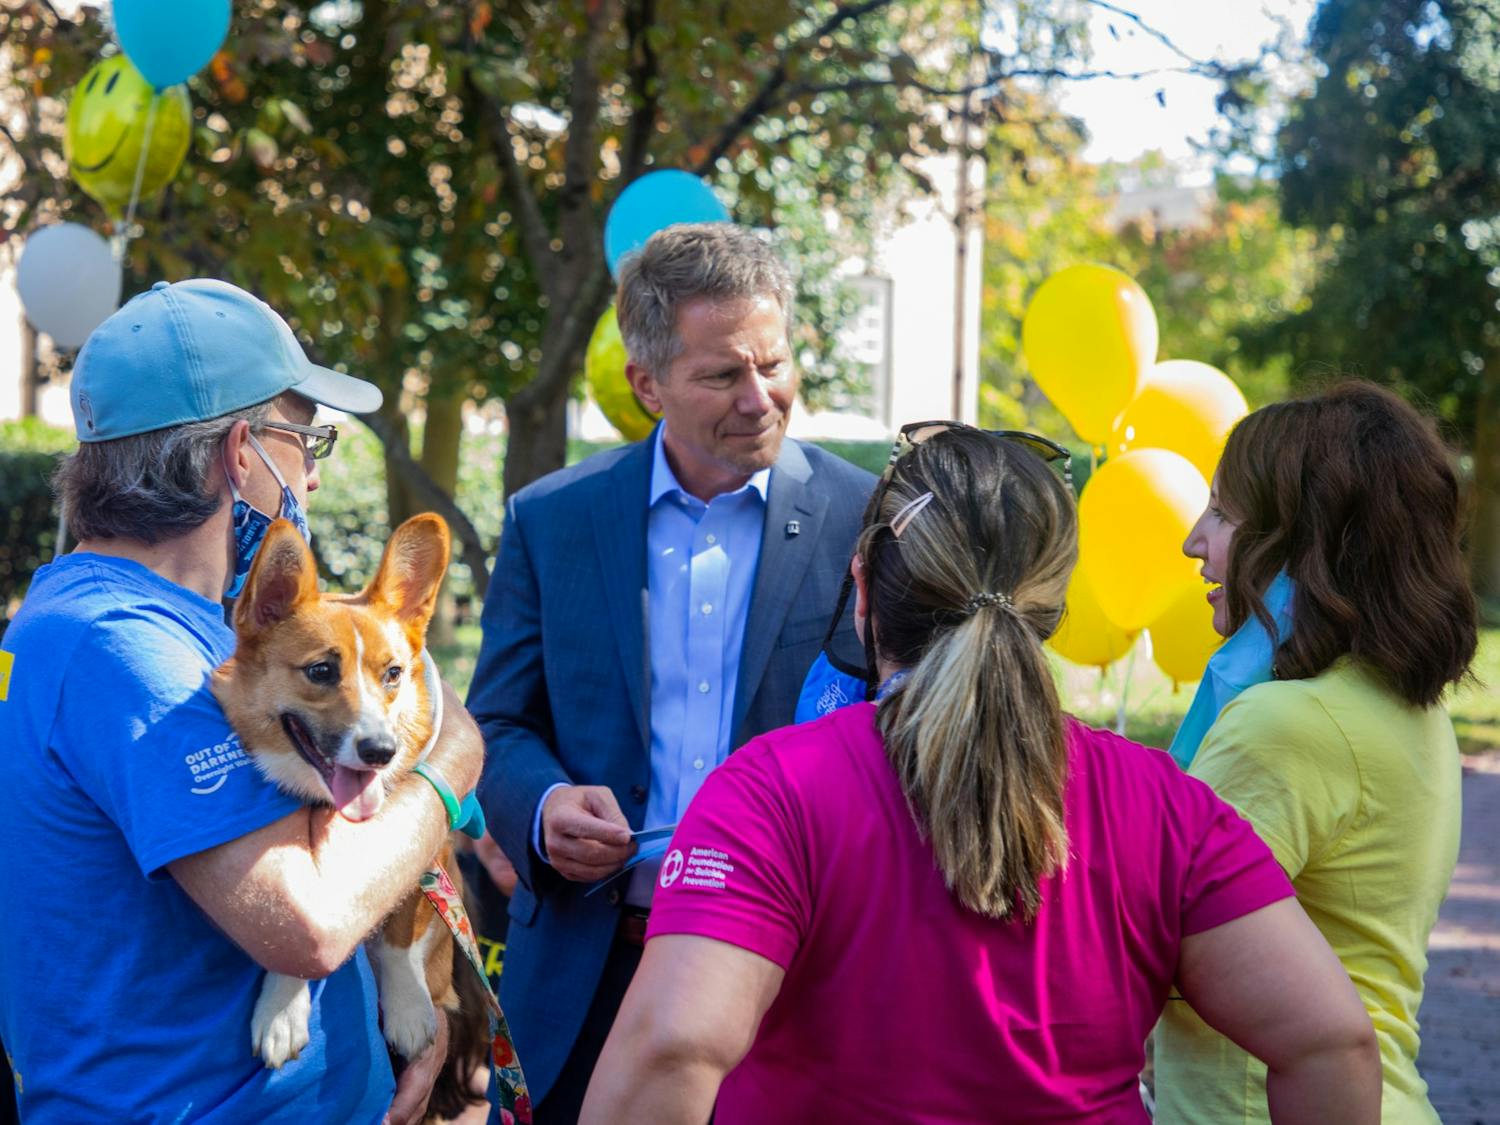 UNC Chancellor Kevin Guskiewicz greets parents, students and puppies near the Old Well on Thursday during the parent rally organized by the Facebook group UNC-CH Parents Helping Parents. Parents and puppies filled the upper quad to offer hugs, baked goods and support.